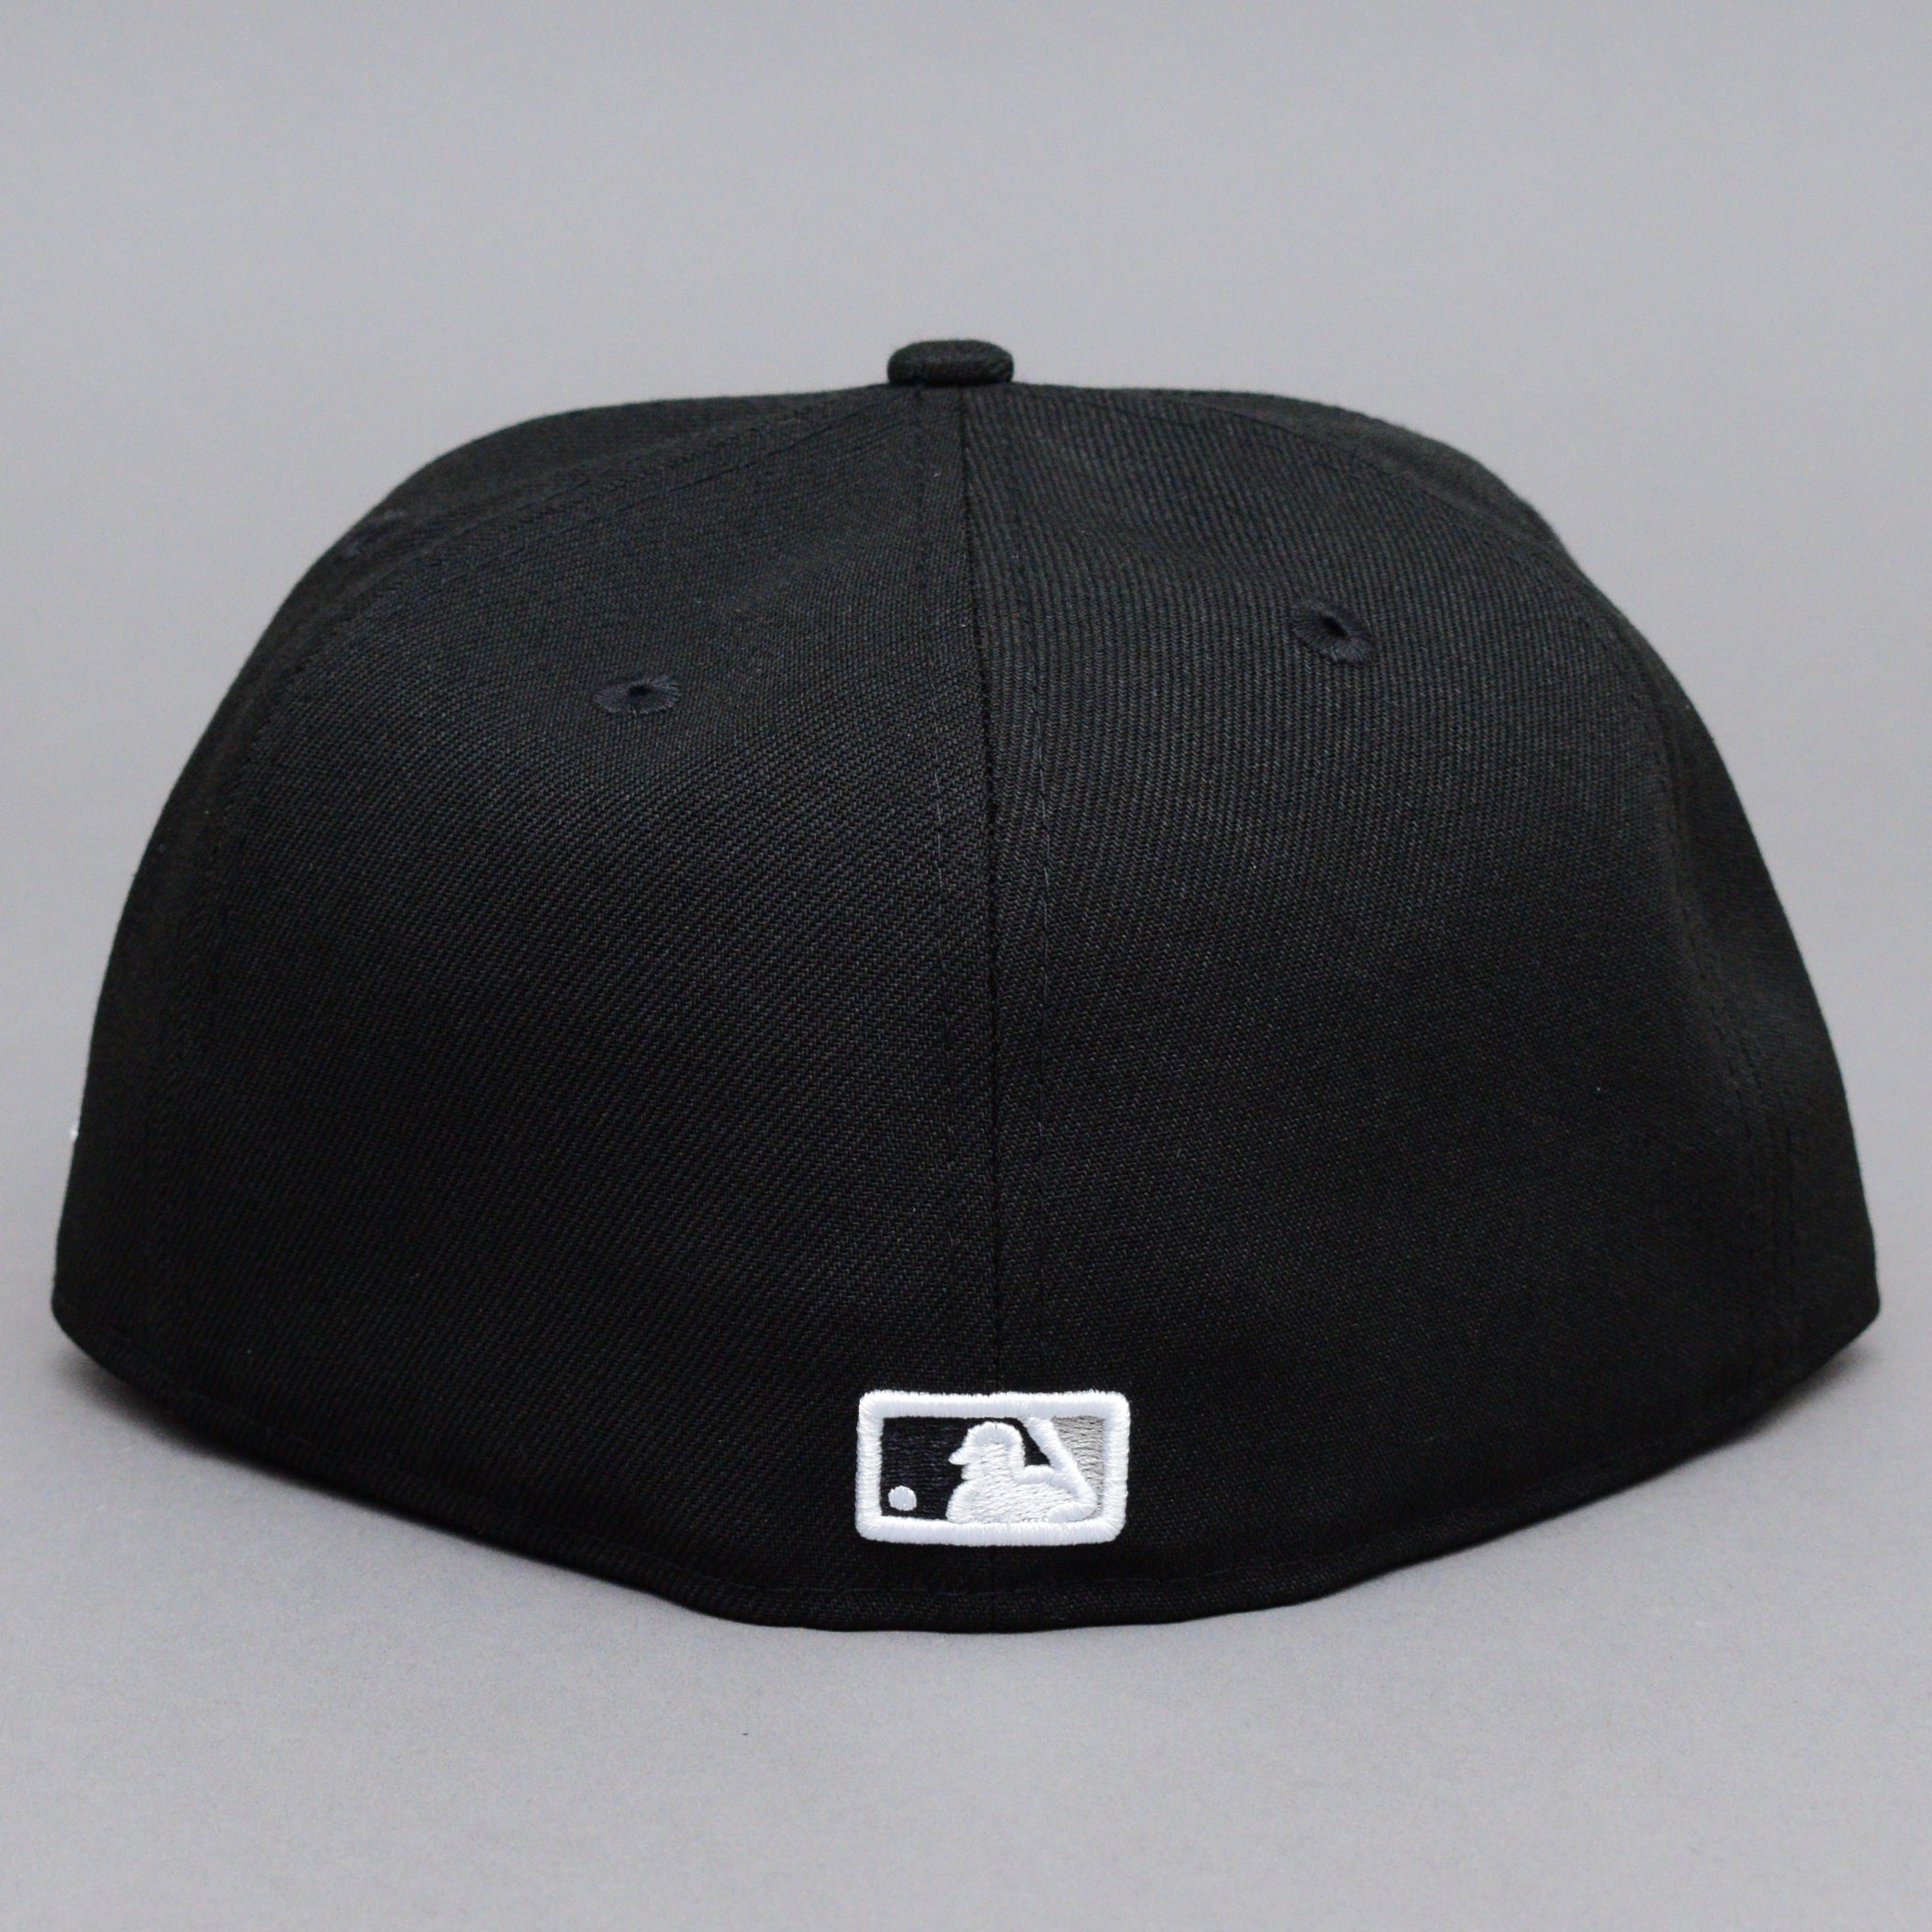 New Era - Chicago White Sox 59Fifty Authentic - Fitted - Black/White